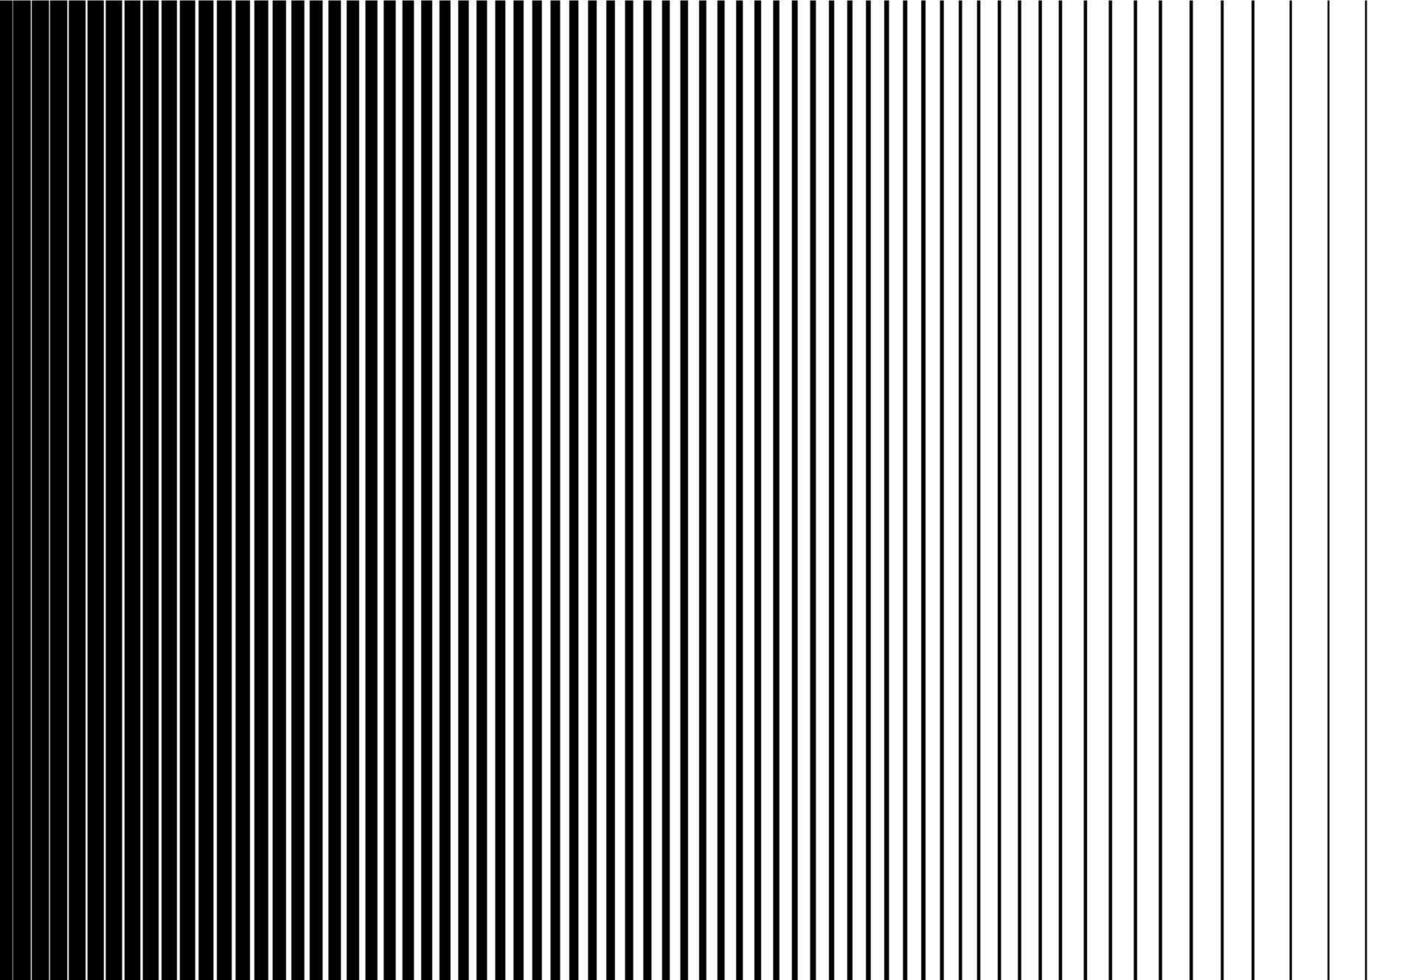 Monochrome vertical halftone gradient stripes background. Abstract geometric pattern with parallel lines in black and white for design and decoration. vector